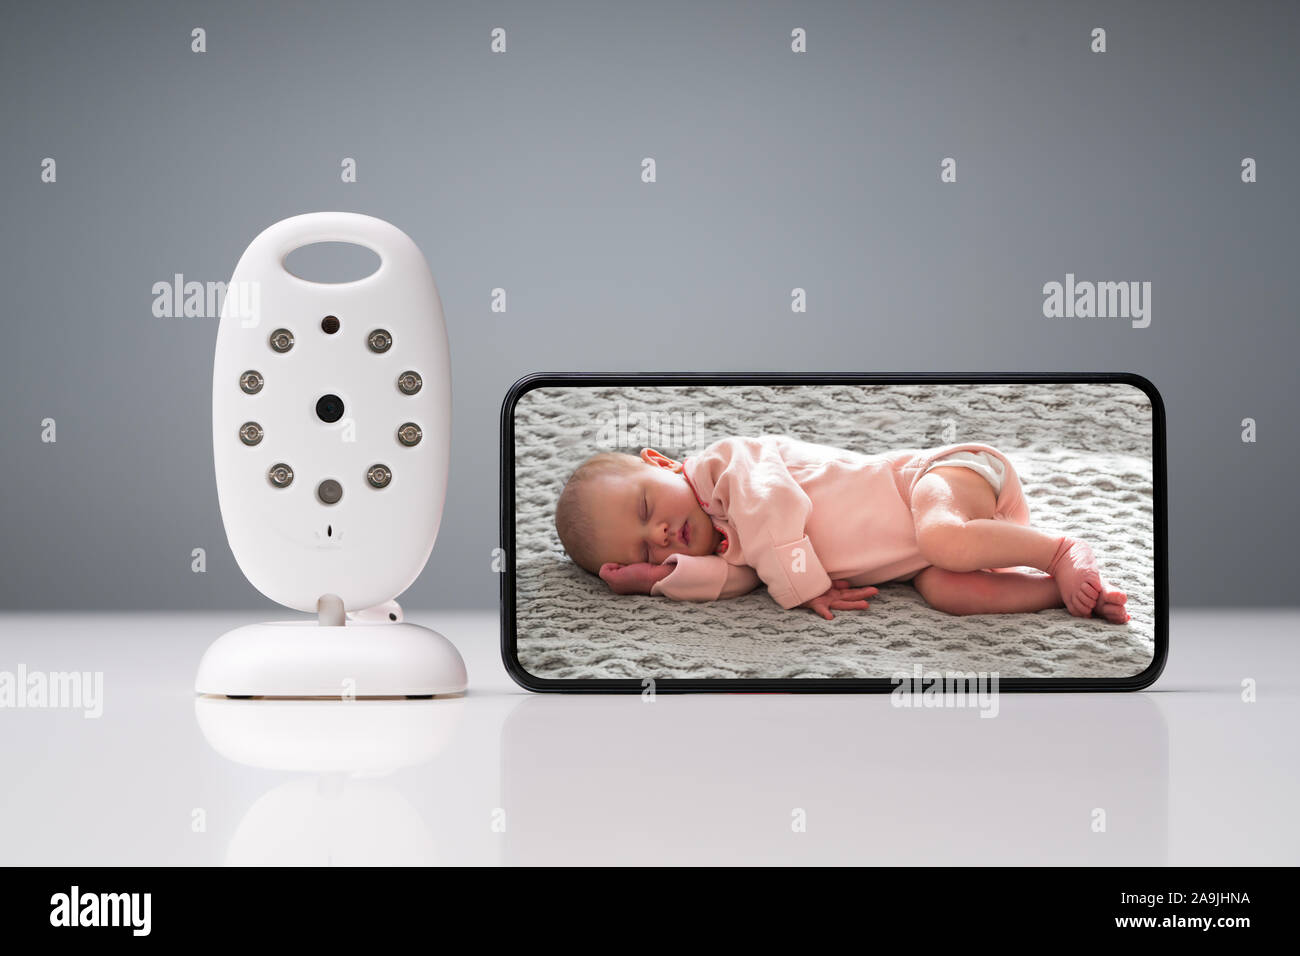 Close-up Of Wireless Camera And Smartphone With Baby Image On Screen On Reflective Table Stock Photo